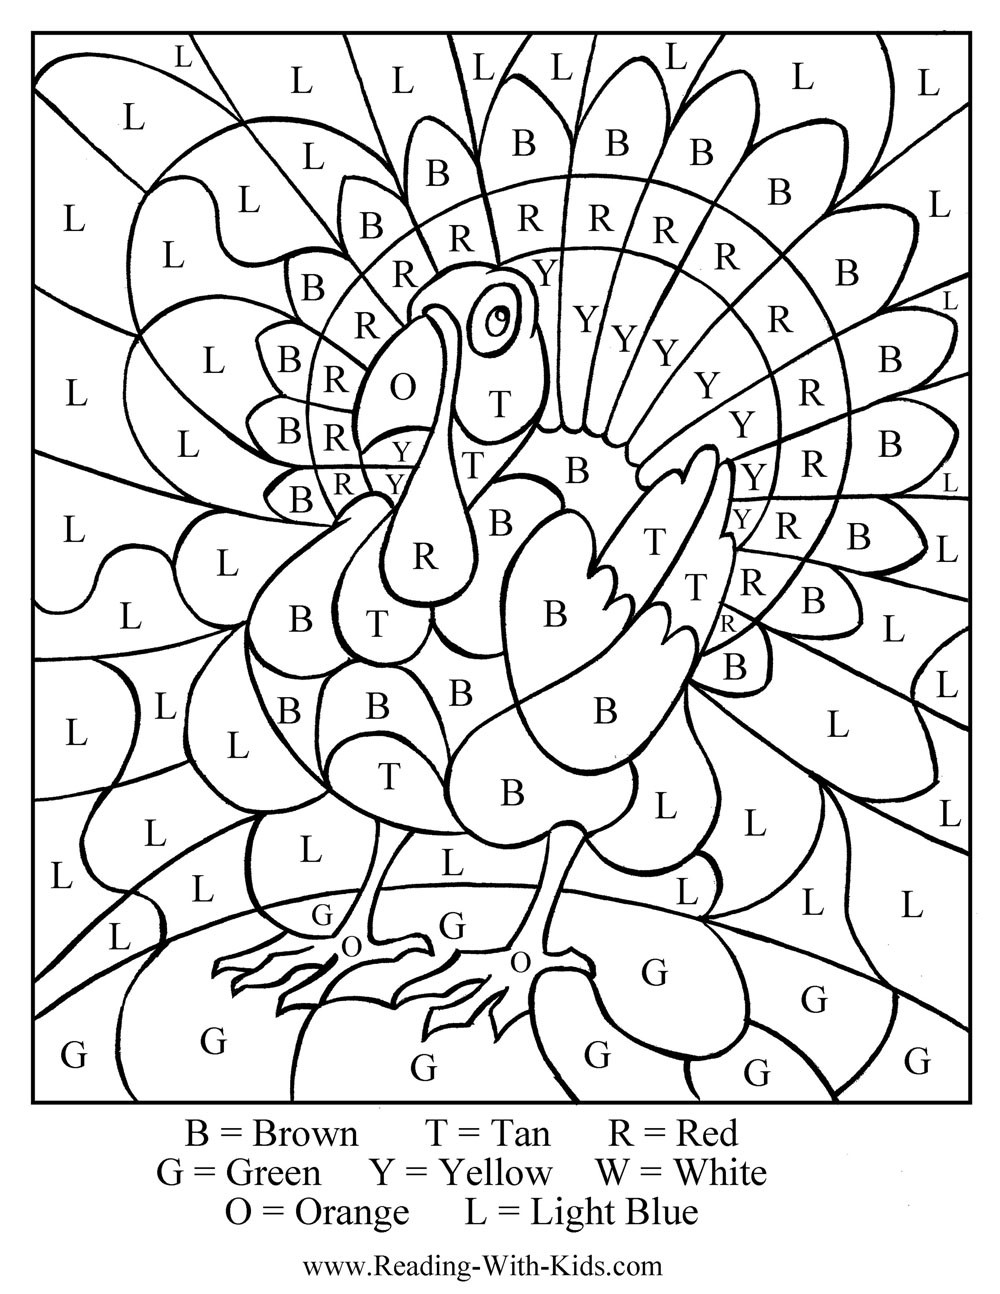 Printable Thanksgiving Coloring Sheets For Kids
 Free Thanksgiving Coloring Pages & Games Printables